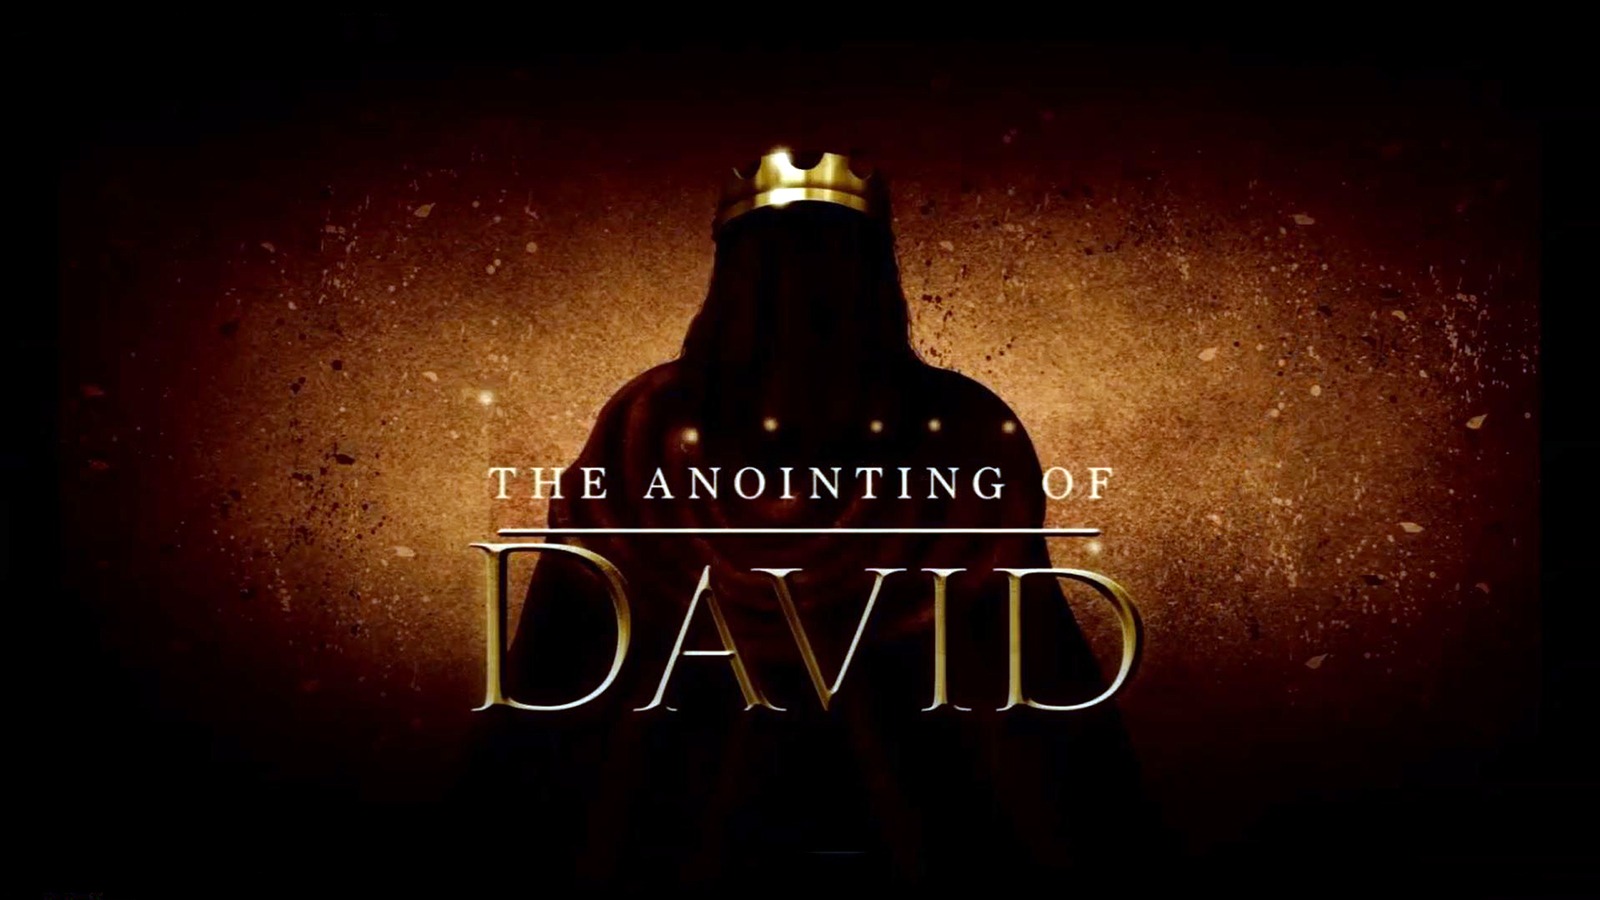 The Anointing of David